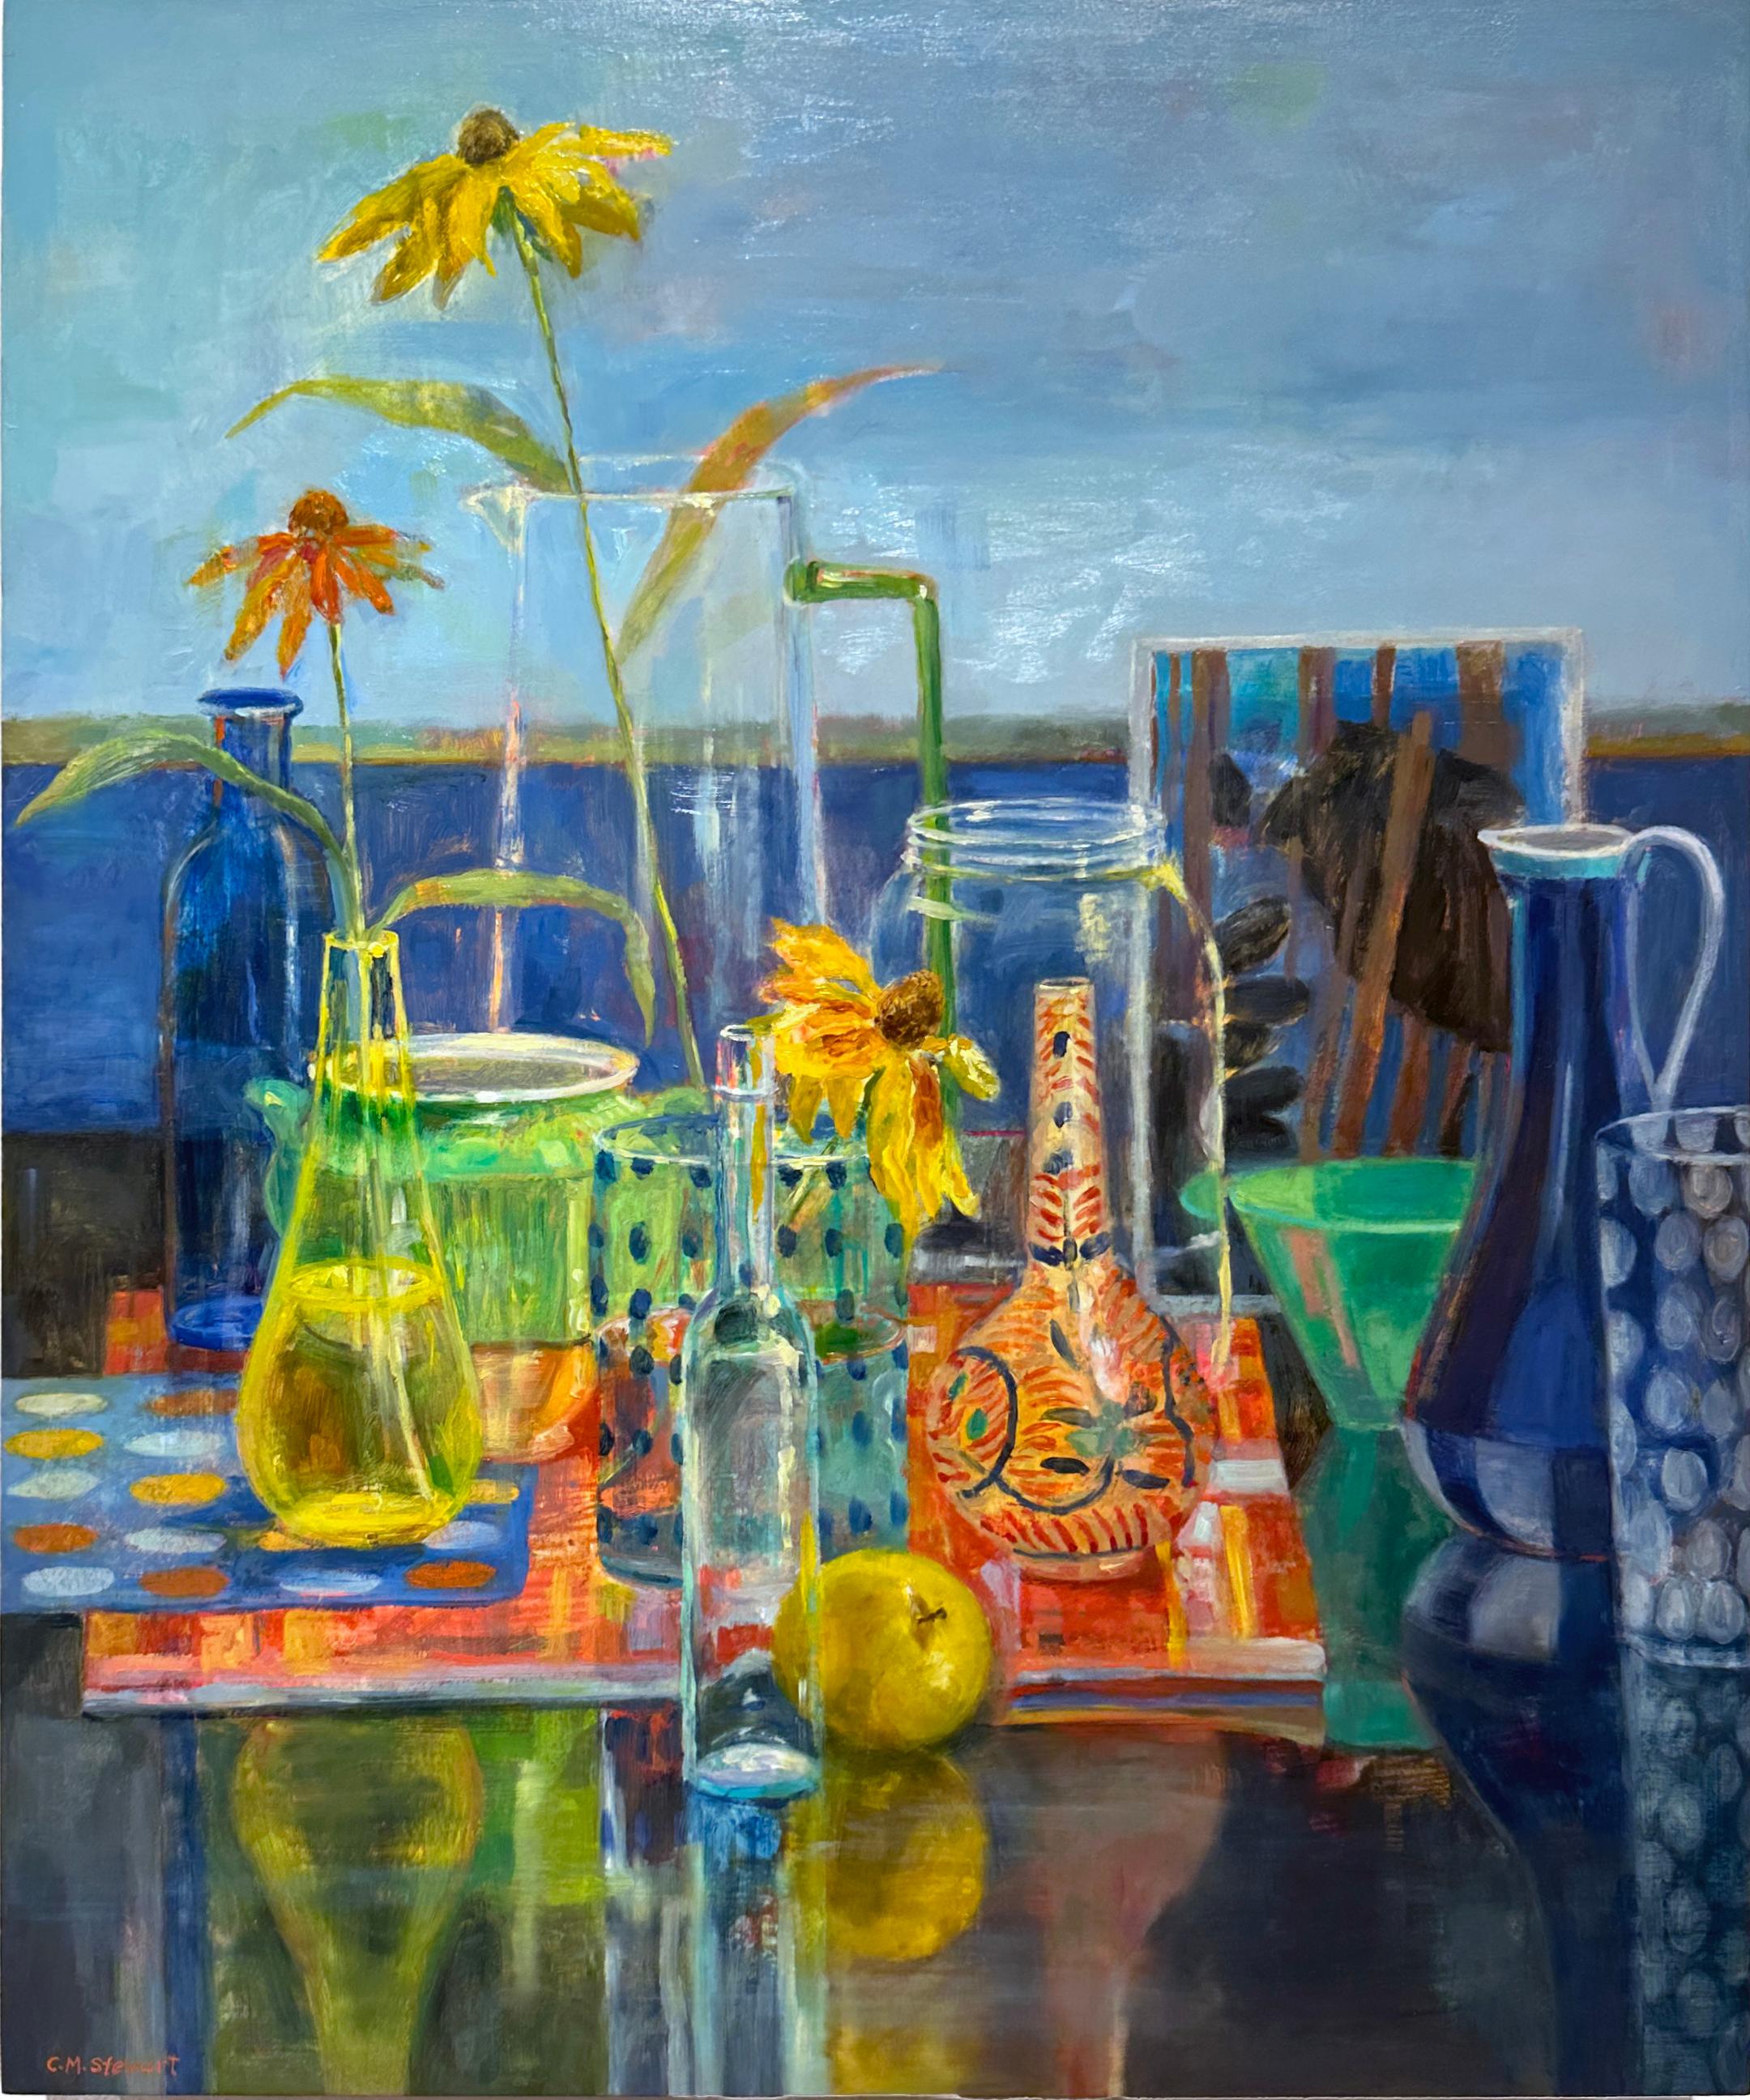 Ontario Summer Painting - Colorful Impressionist Still Life, Oil Painting